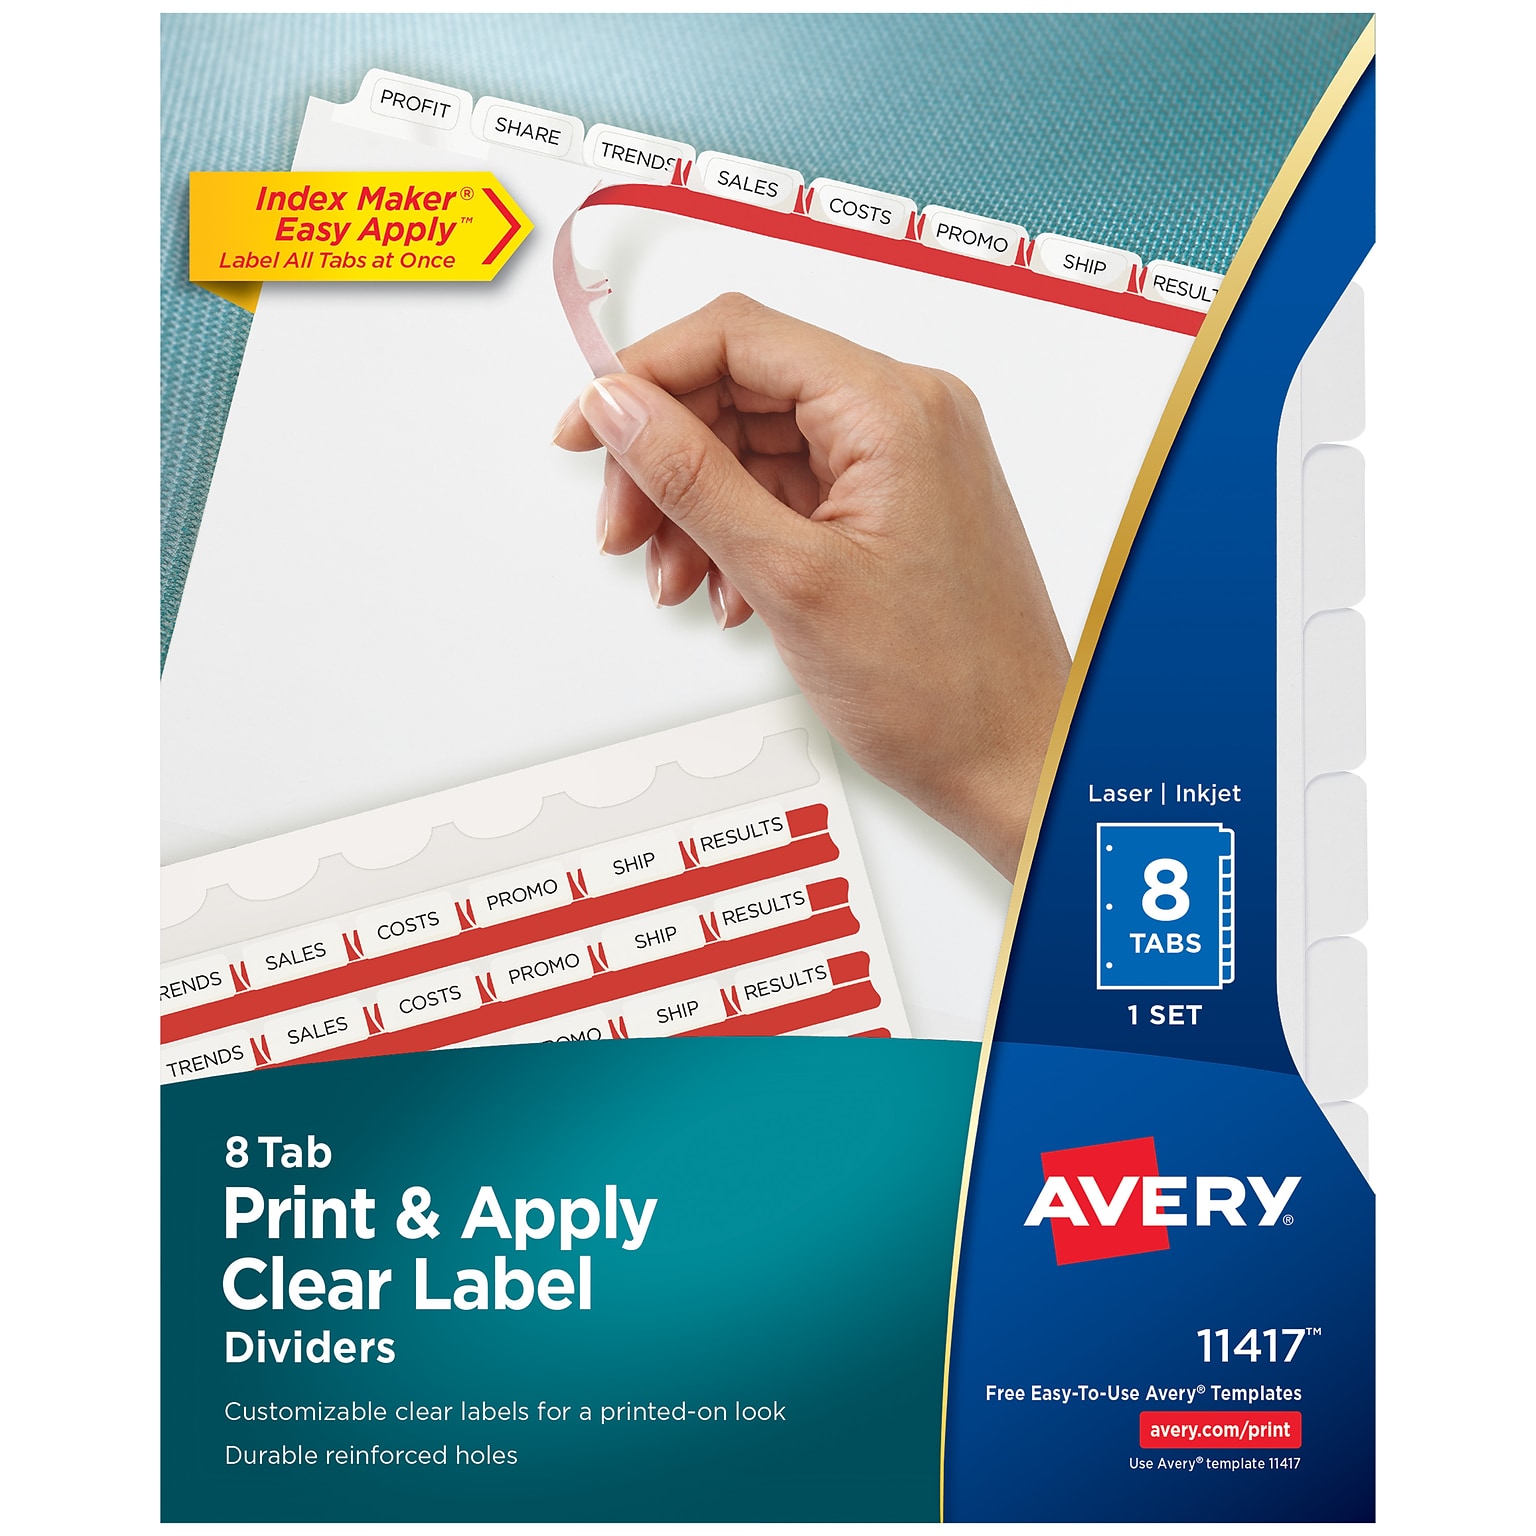 Avery Index Maker Paper Dividers with Print & Apply Label Sheets, 8 Tabs, White (11417)